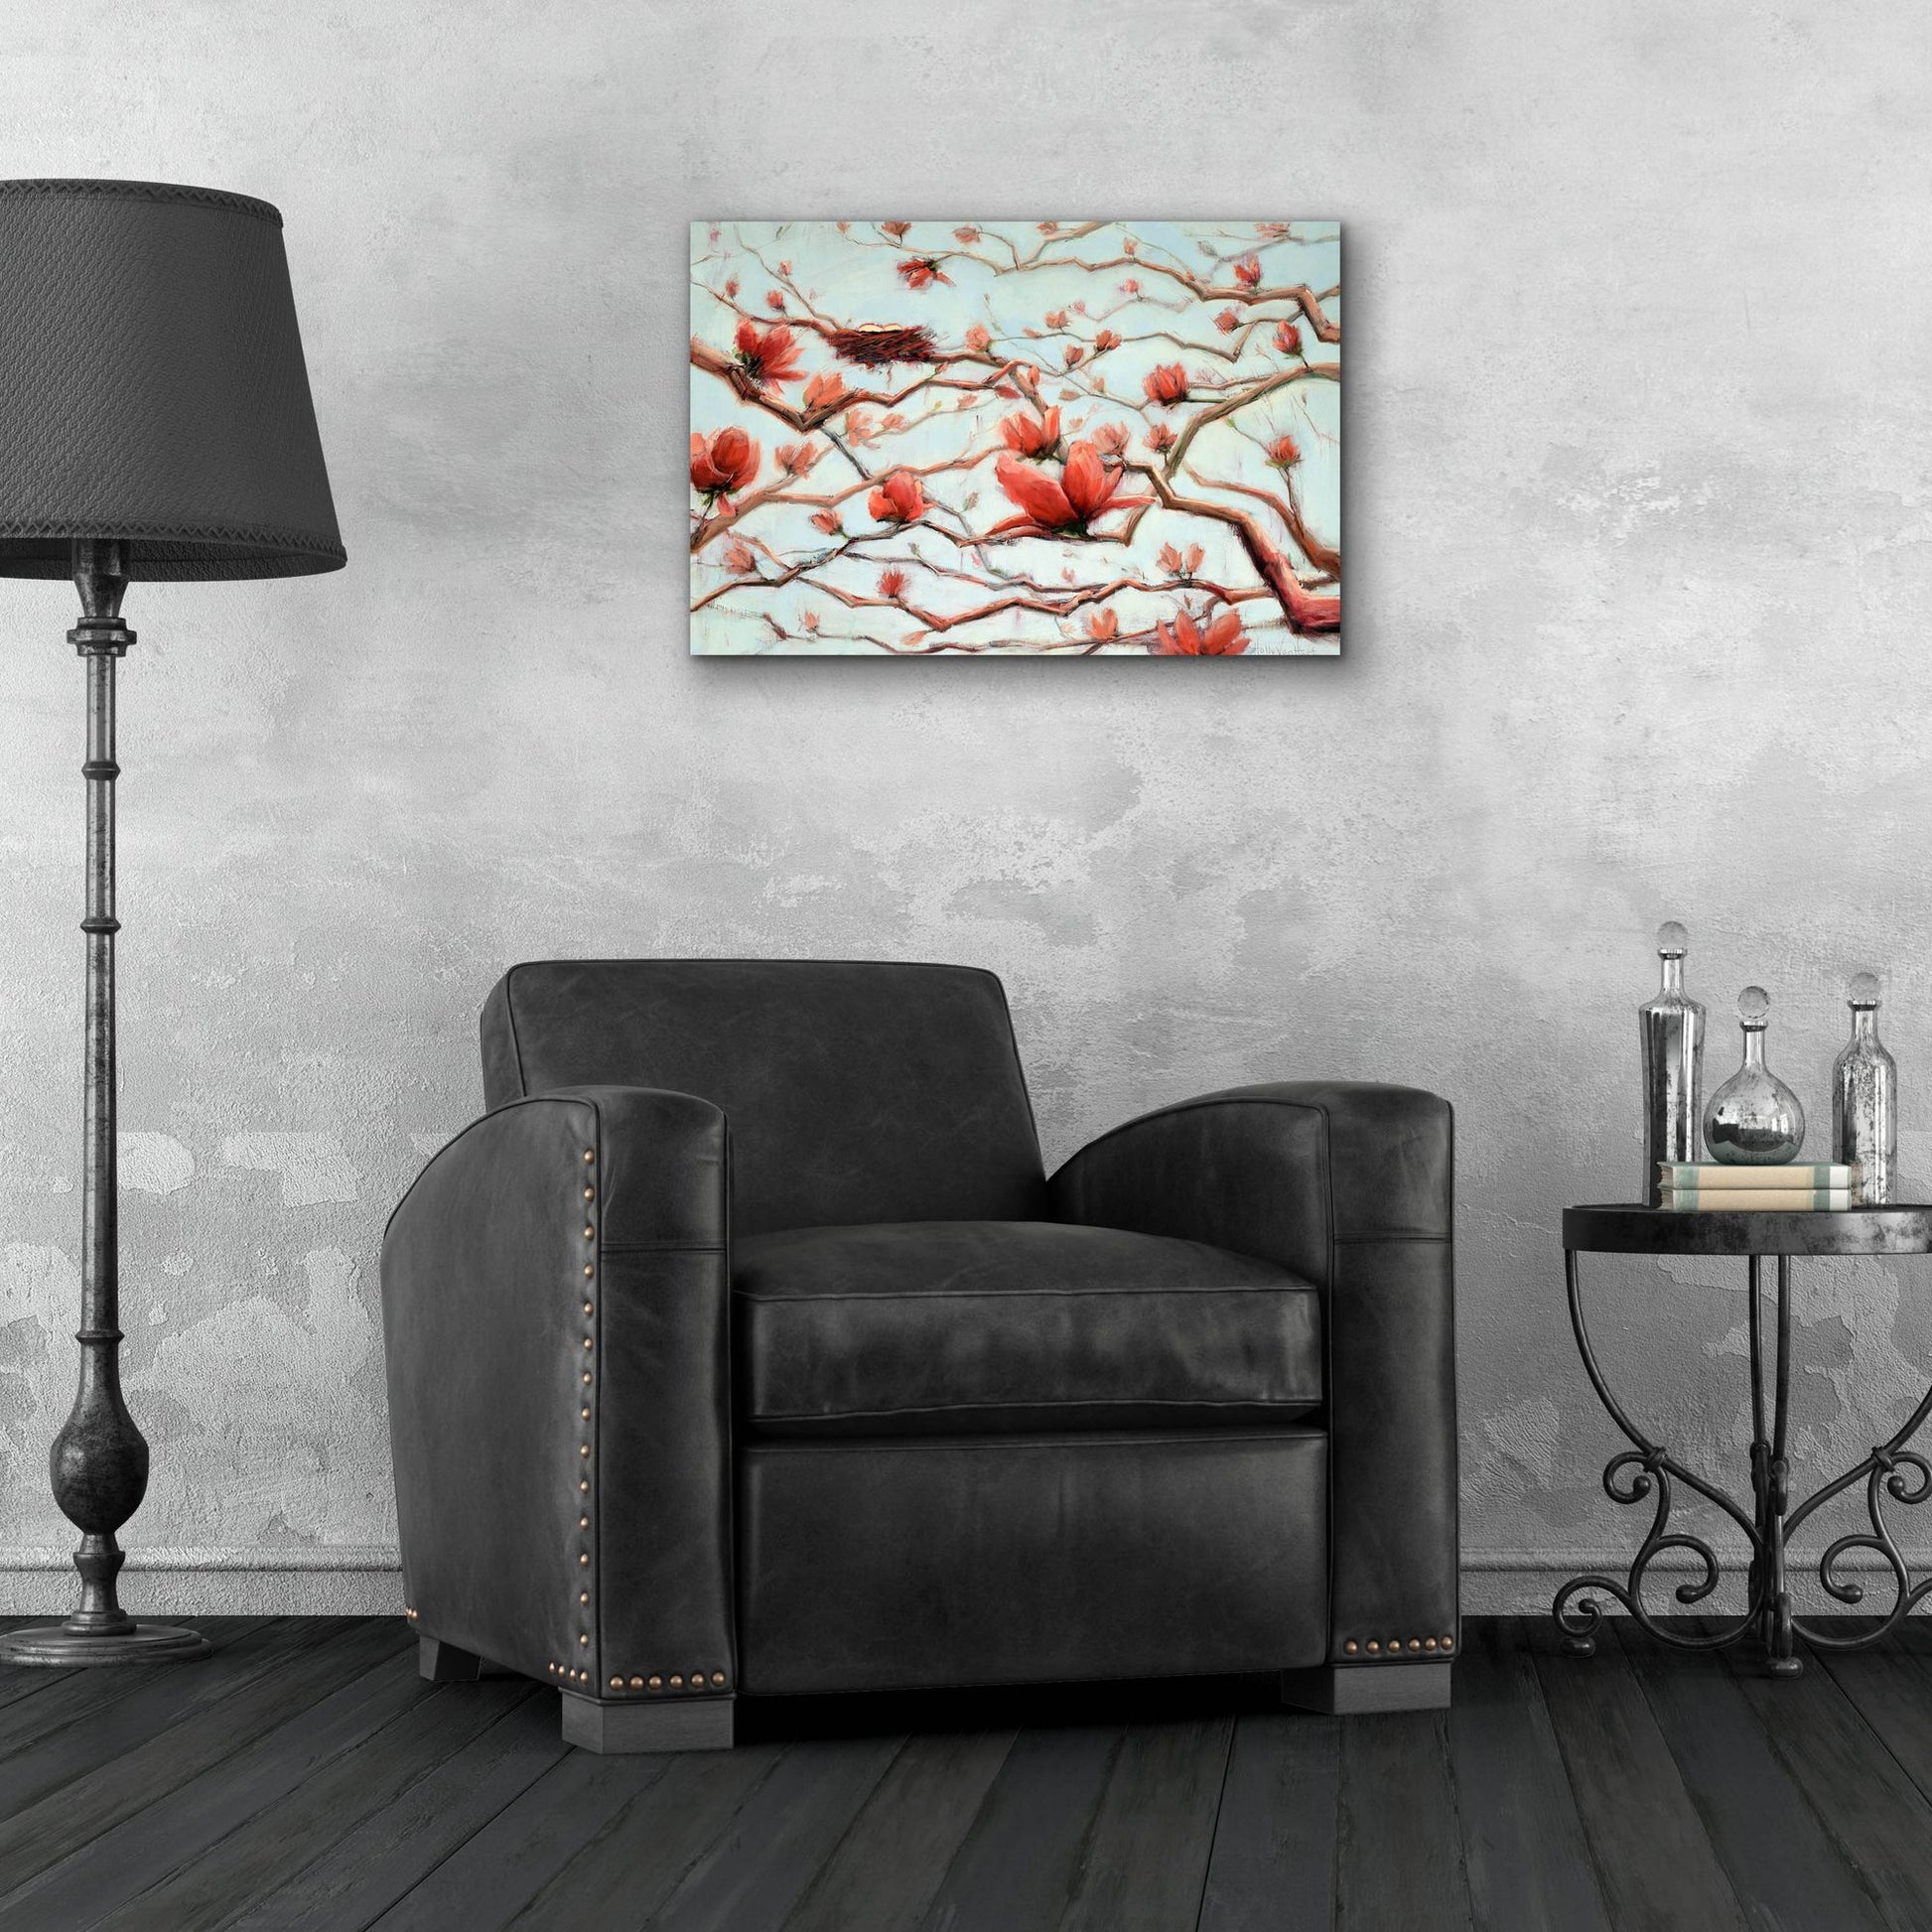 Epic Art 'Possibilities In Full Bloom' by Holly Van Hart, Acrylic Glass Wall Art,24x16